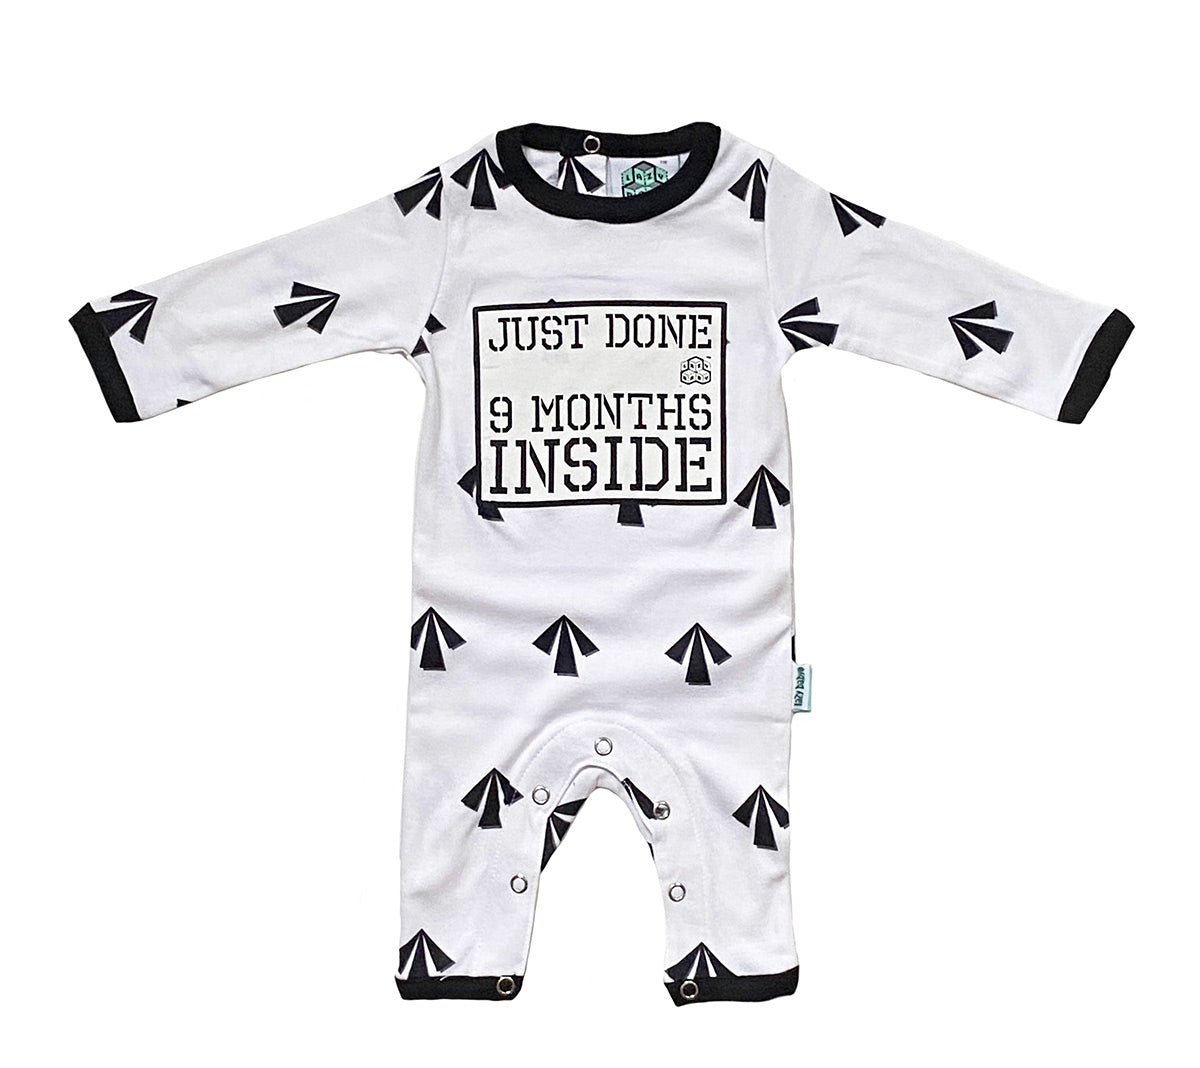 Just Done 9 Months Inside slogan baby grow with arrows design - black arrows on white baby grow